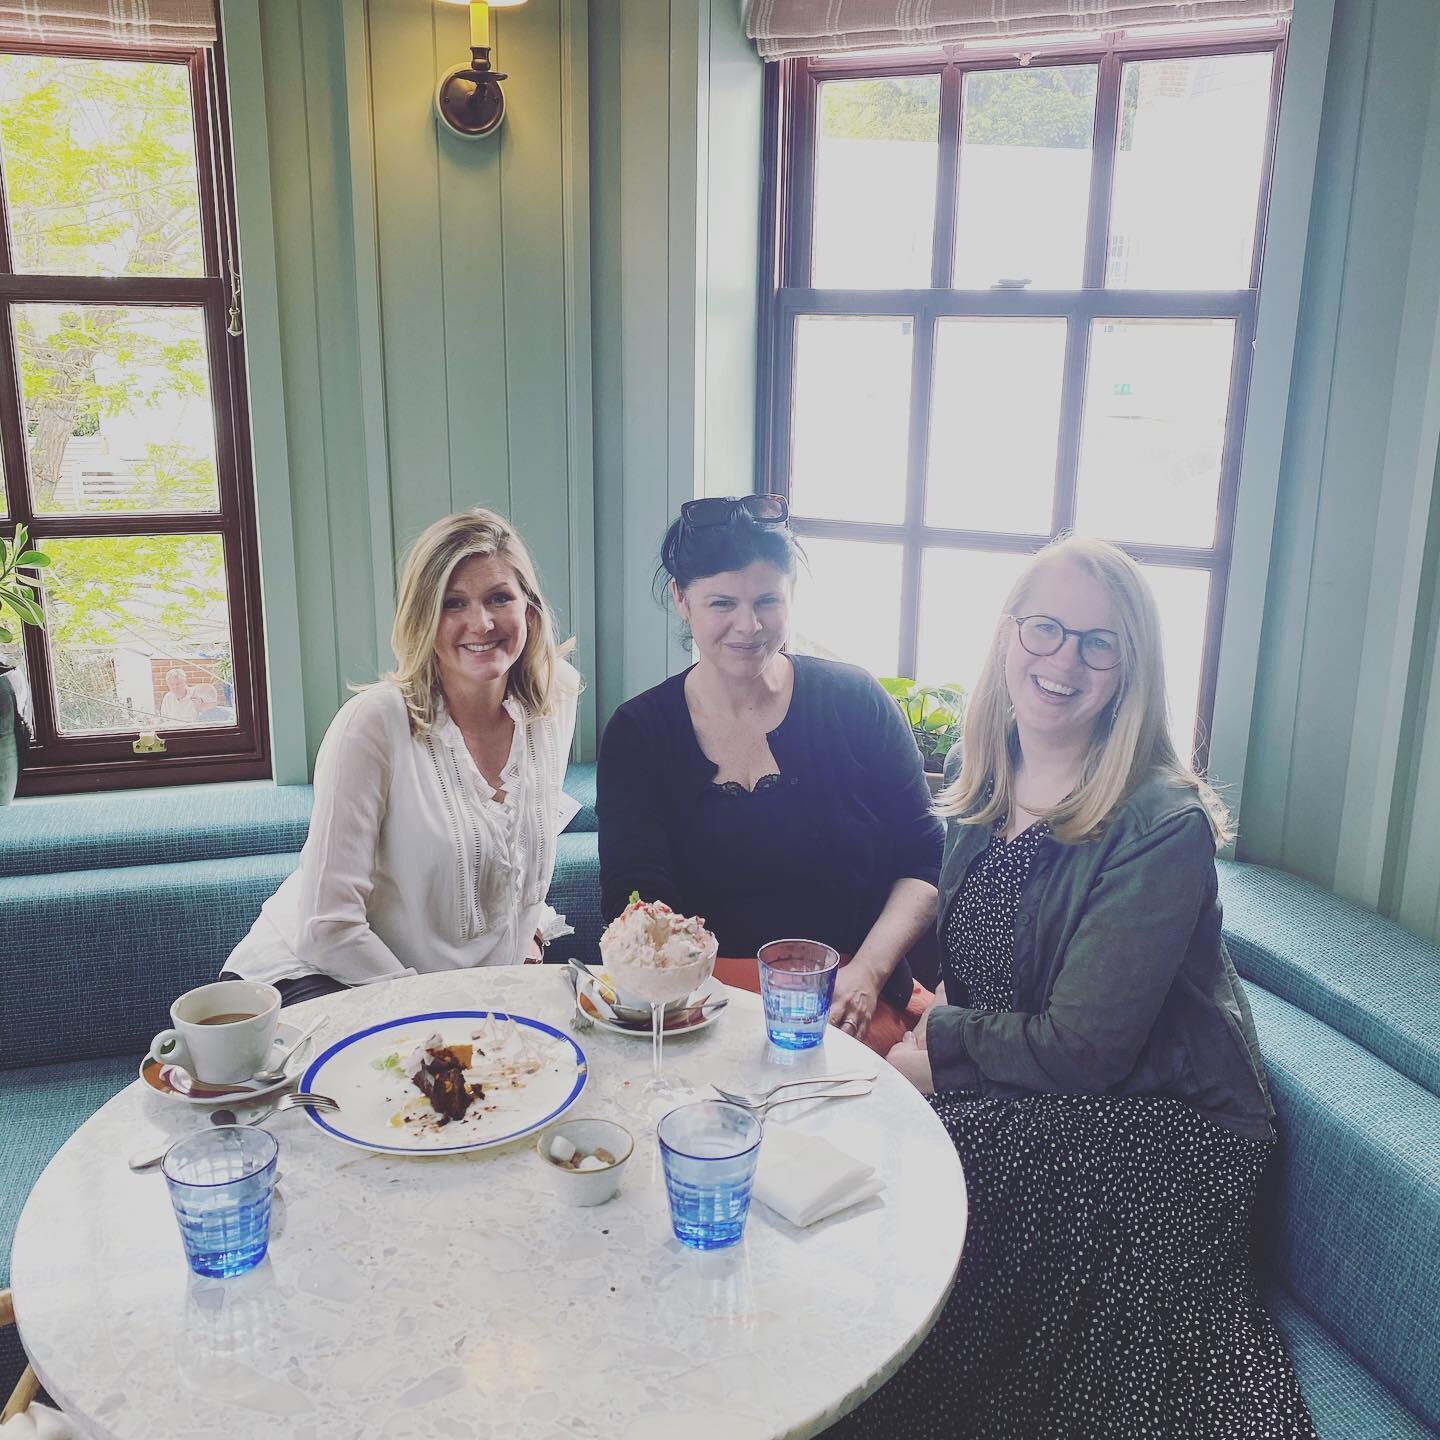 A lovely way to spend the afternoon - with this creative duo! Love our lunches-amazing food and surroundings too thanks to the lovely Claire! @clairefyfecooks @gunterandco @dkjoyce @mitrehamptoncourt